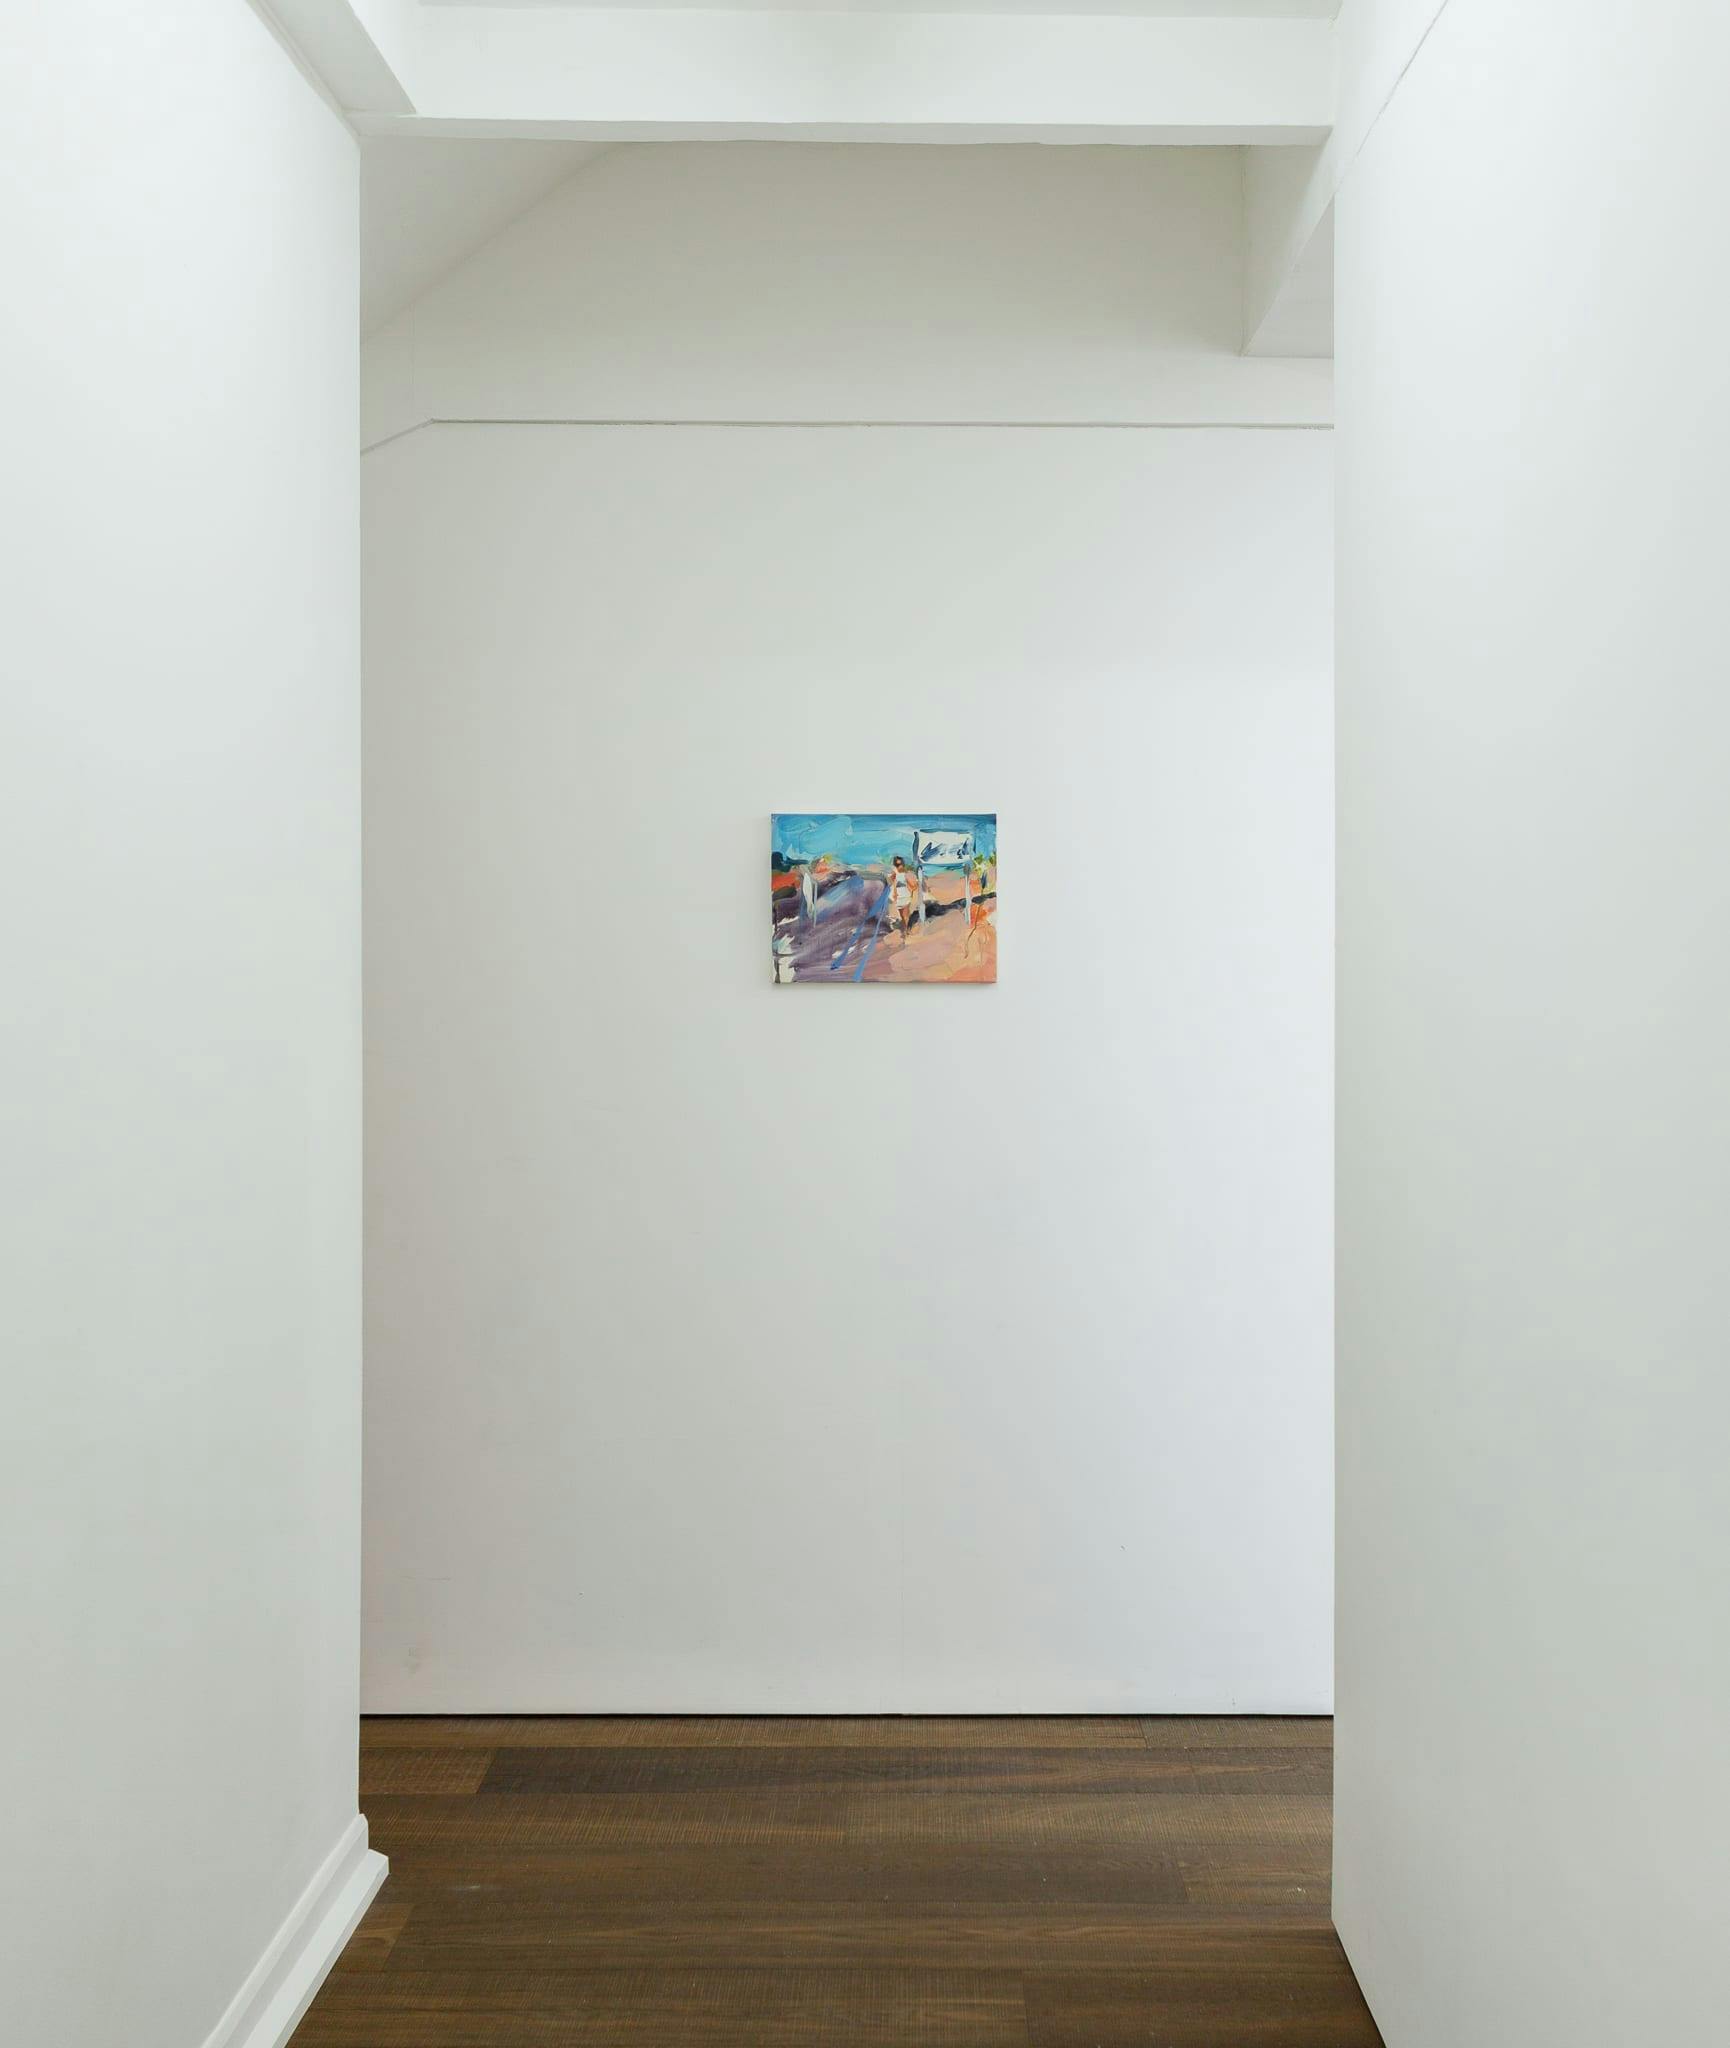 Installation shots of Laura Lancaster's solo show at Workplace London. Close up crop paintings of sleeping women and figures in landscapes, loosely painted.